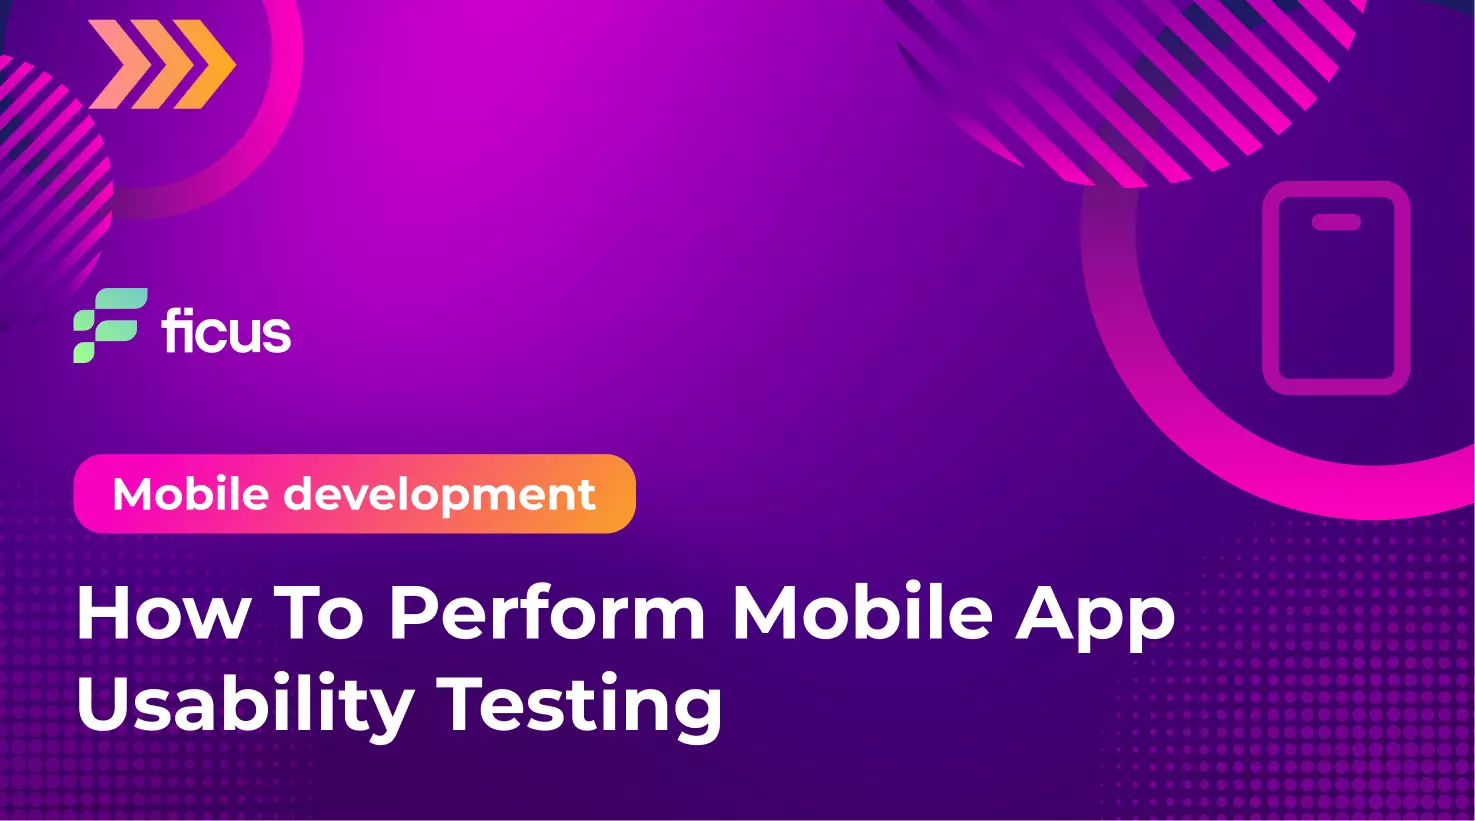 6_How To Perform Mobile App Usability Testing